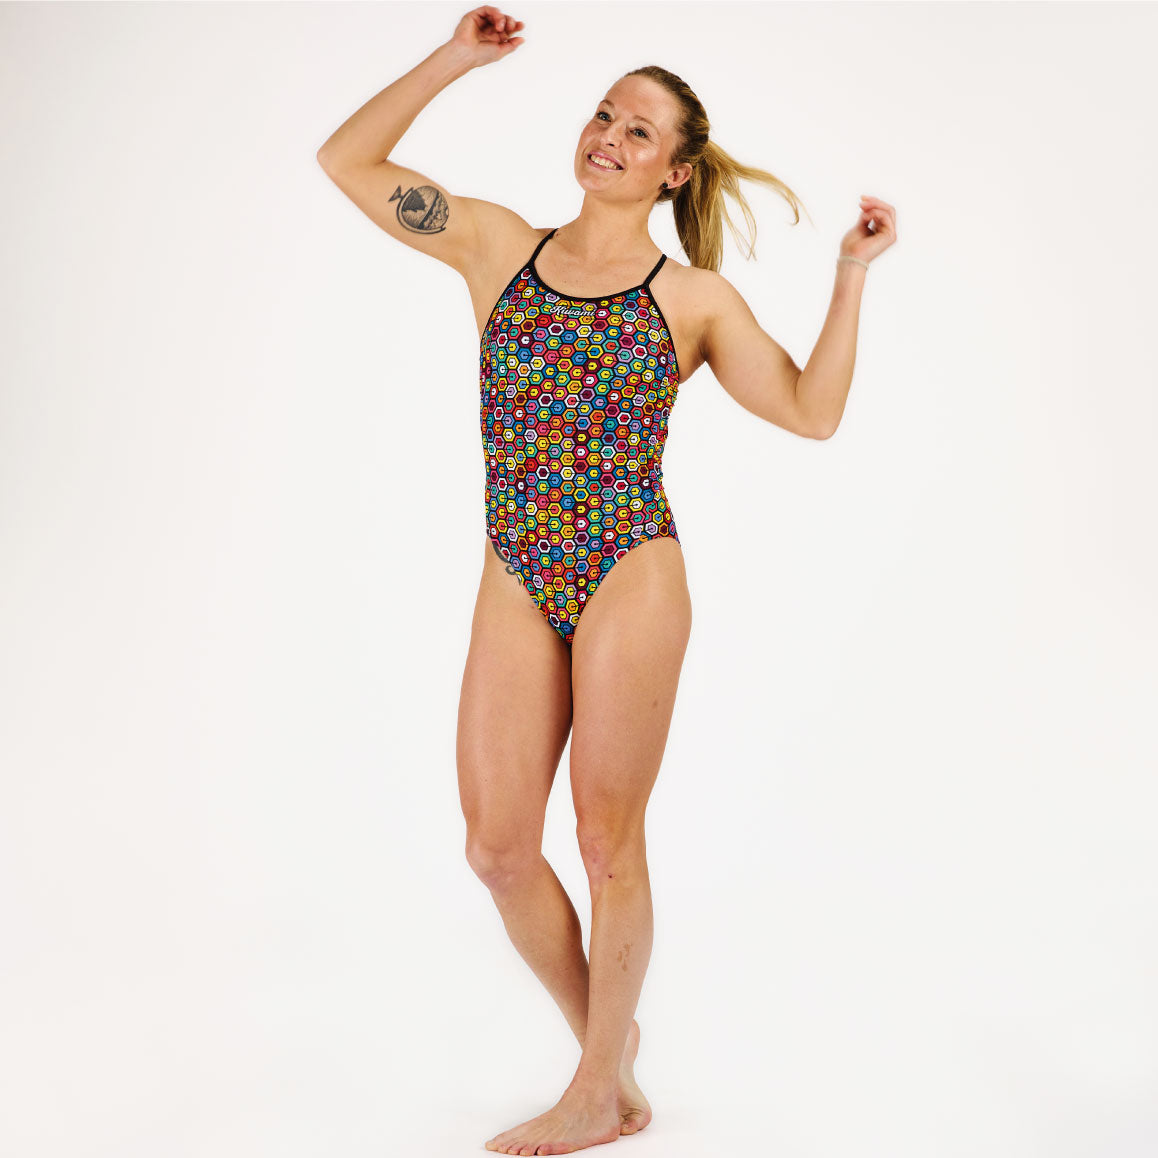 The sports 1 piece swimsuits are designed to be comfortable and perfectly adjusted to your figure. With a second skin effect